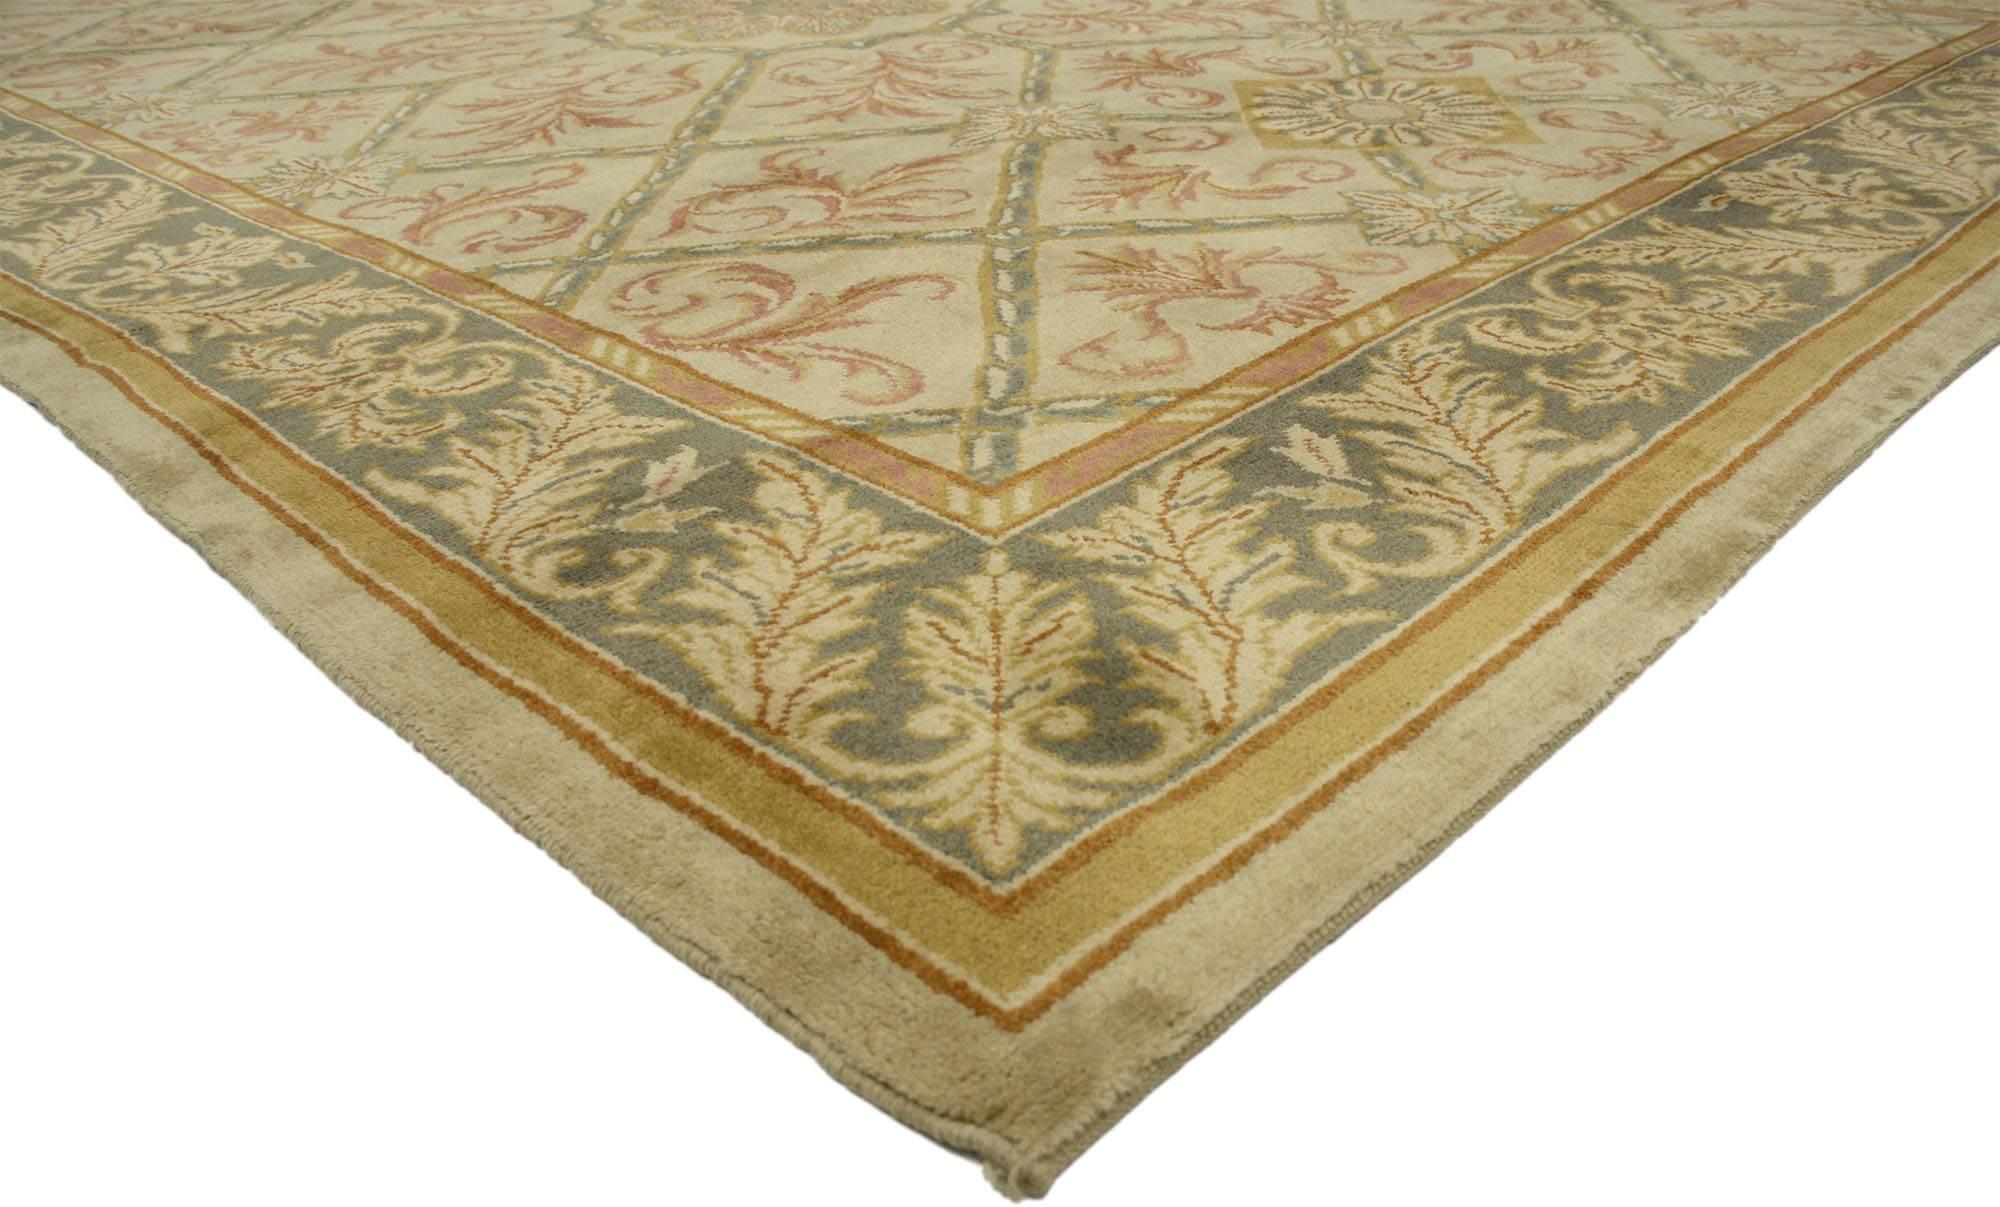 77116, vintage Turkish Oushak rug with Elizabethan style and French Influence. This hand knotted wool vintage Turkish Oushak rug features a central roundel surrounded by an all-over garden lattice design composed of a symmetrical diamond scroll